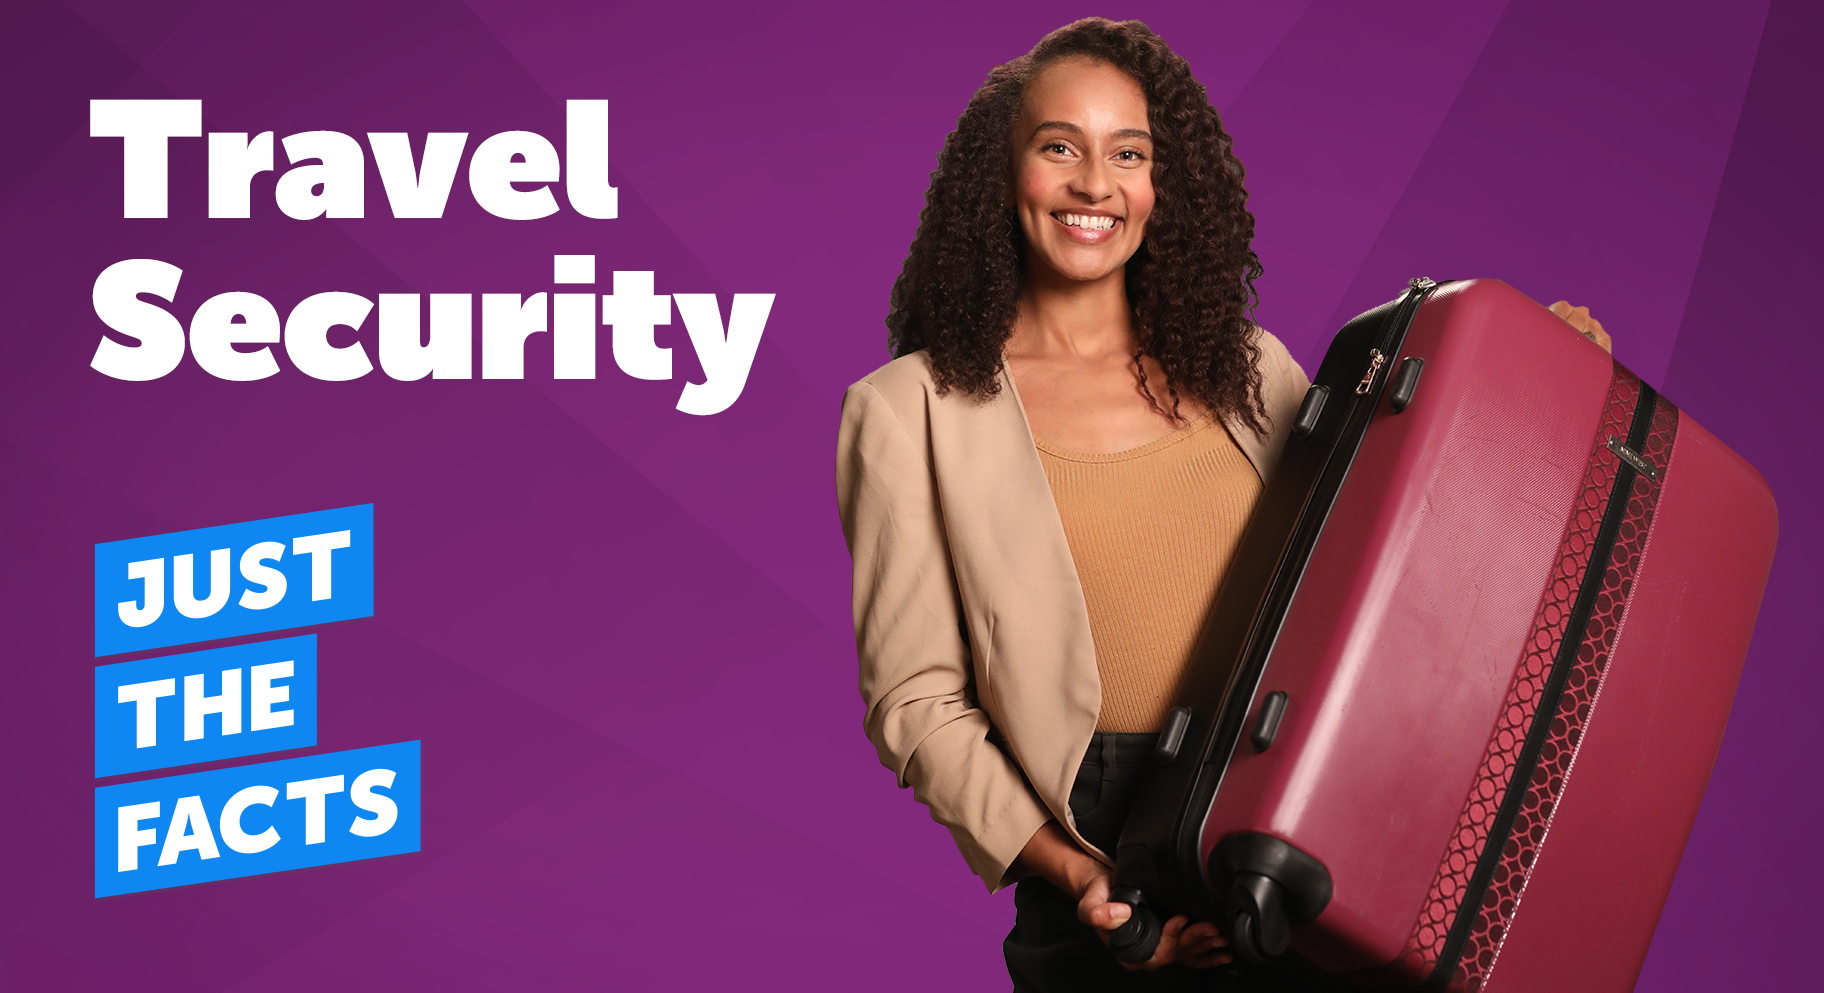 Just the Facts: Travel Security